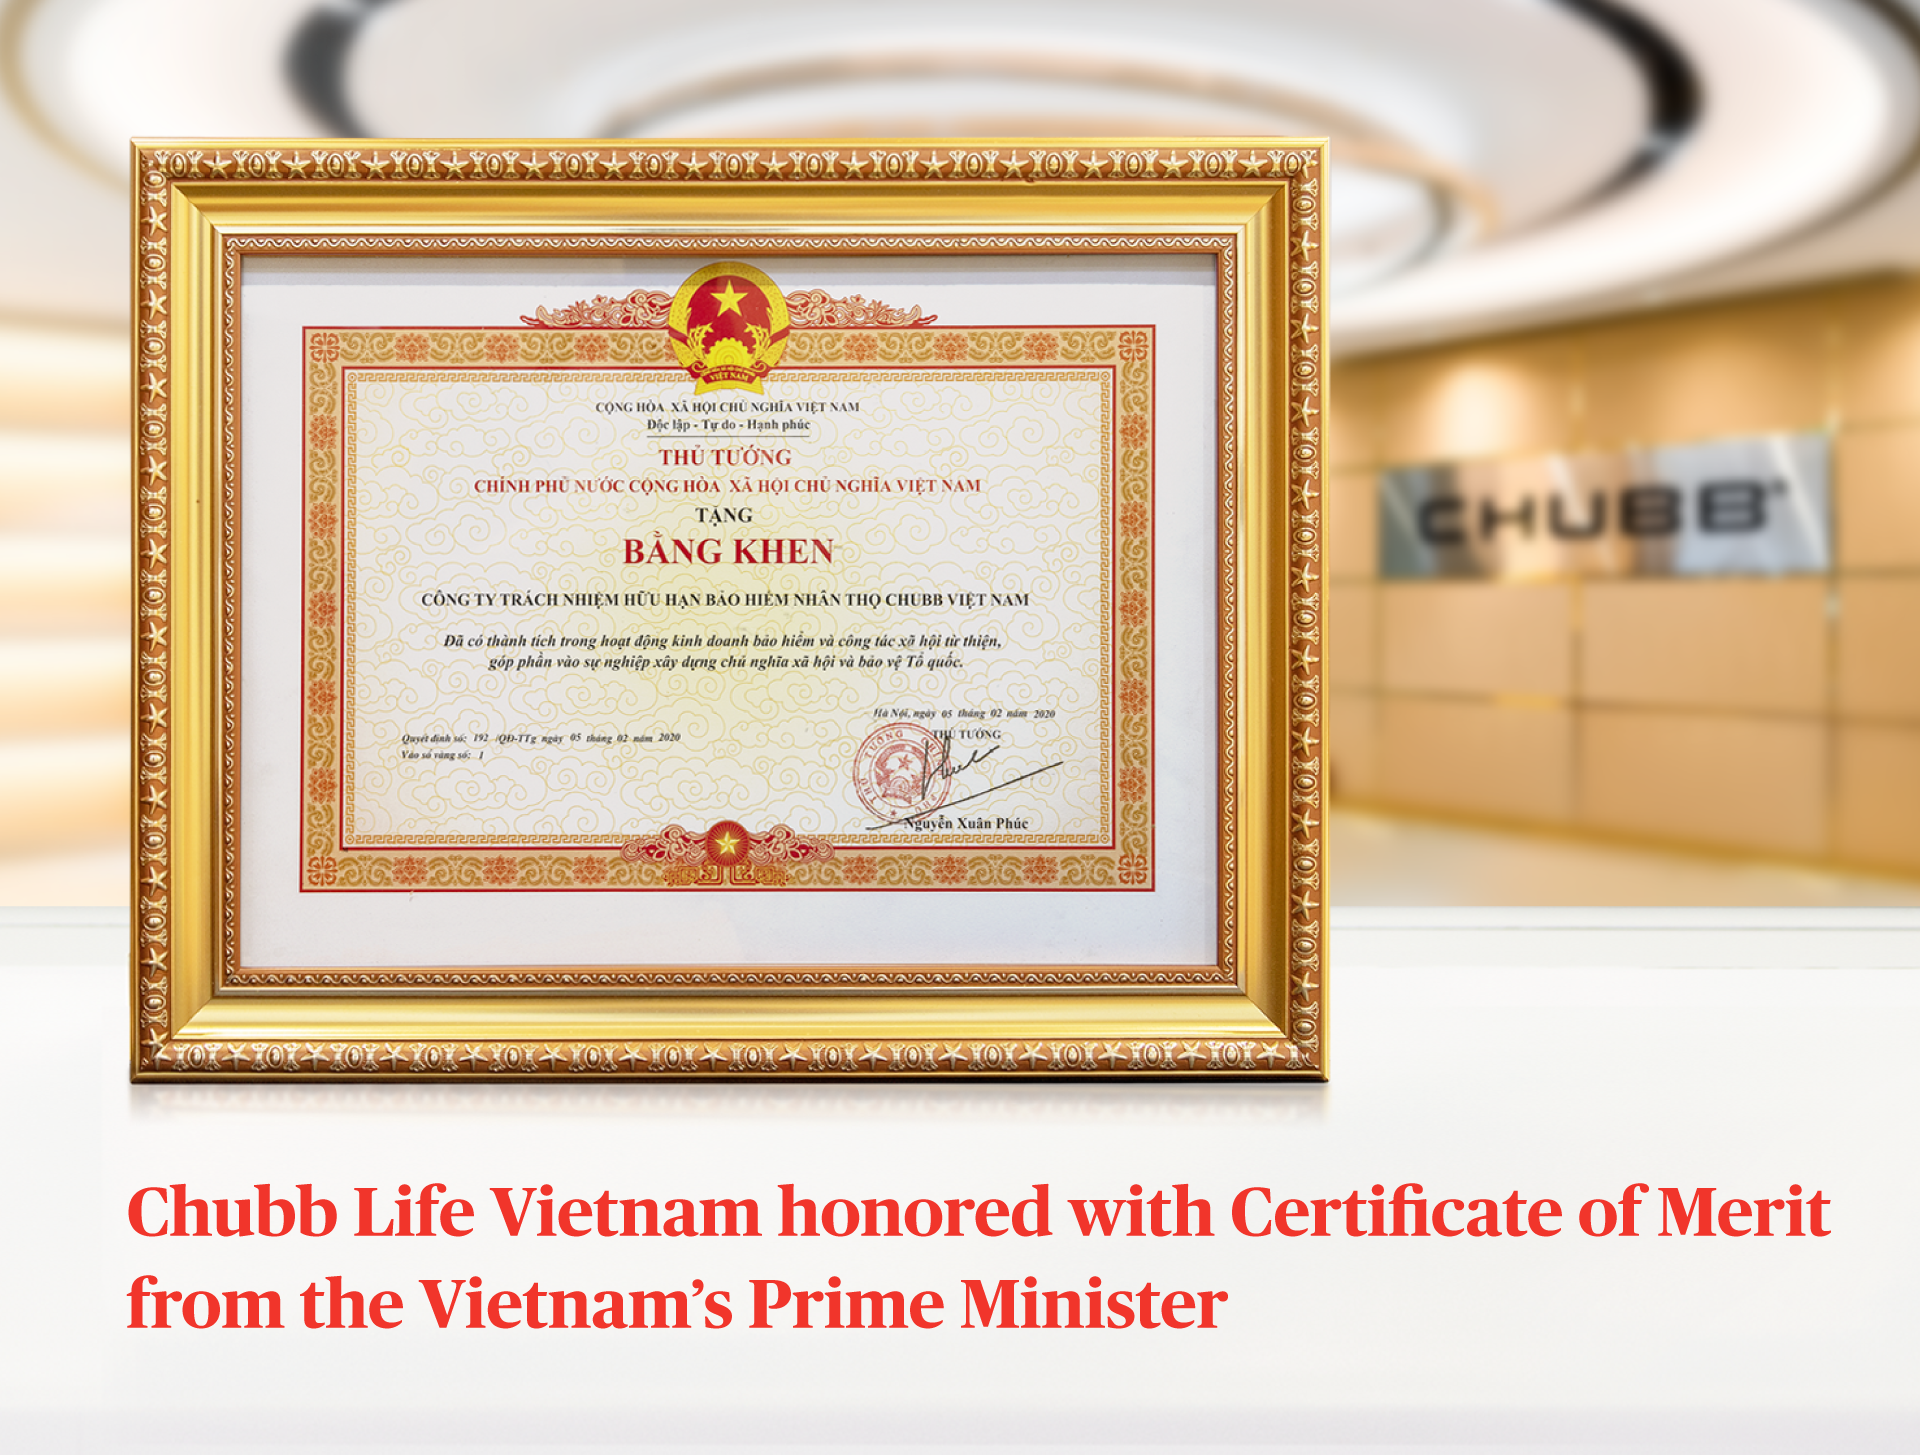 chubb life vietnam honoured with certificate of merit from vietnamese prime minister